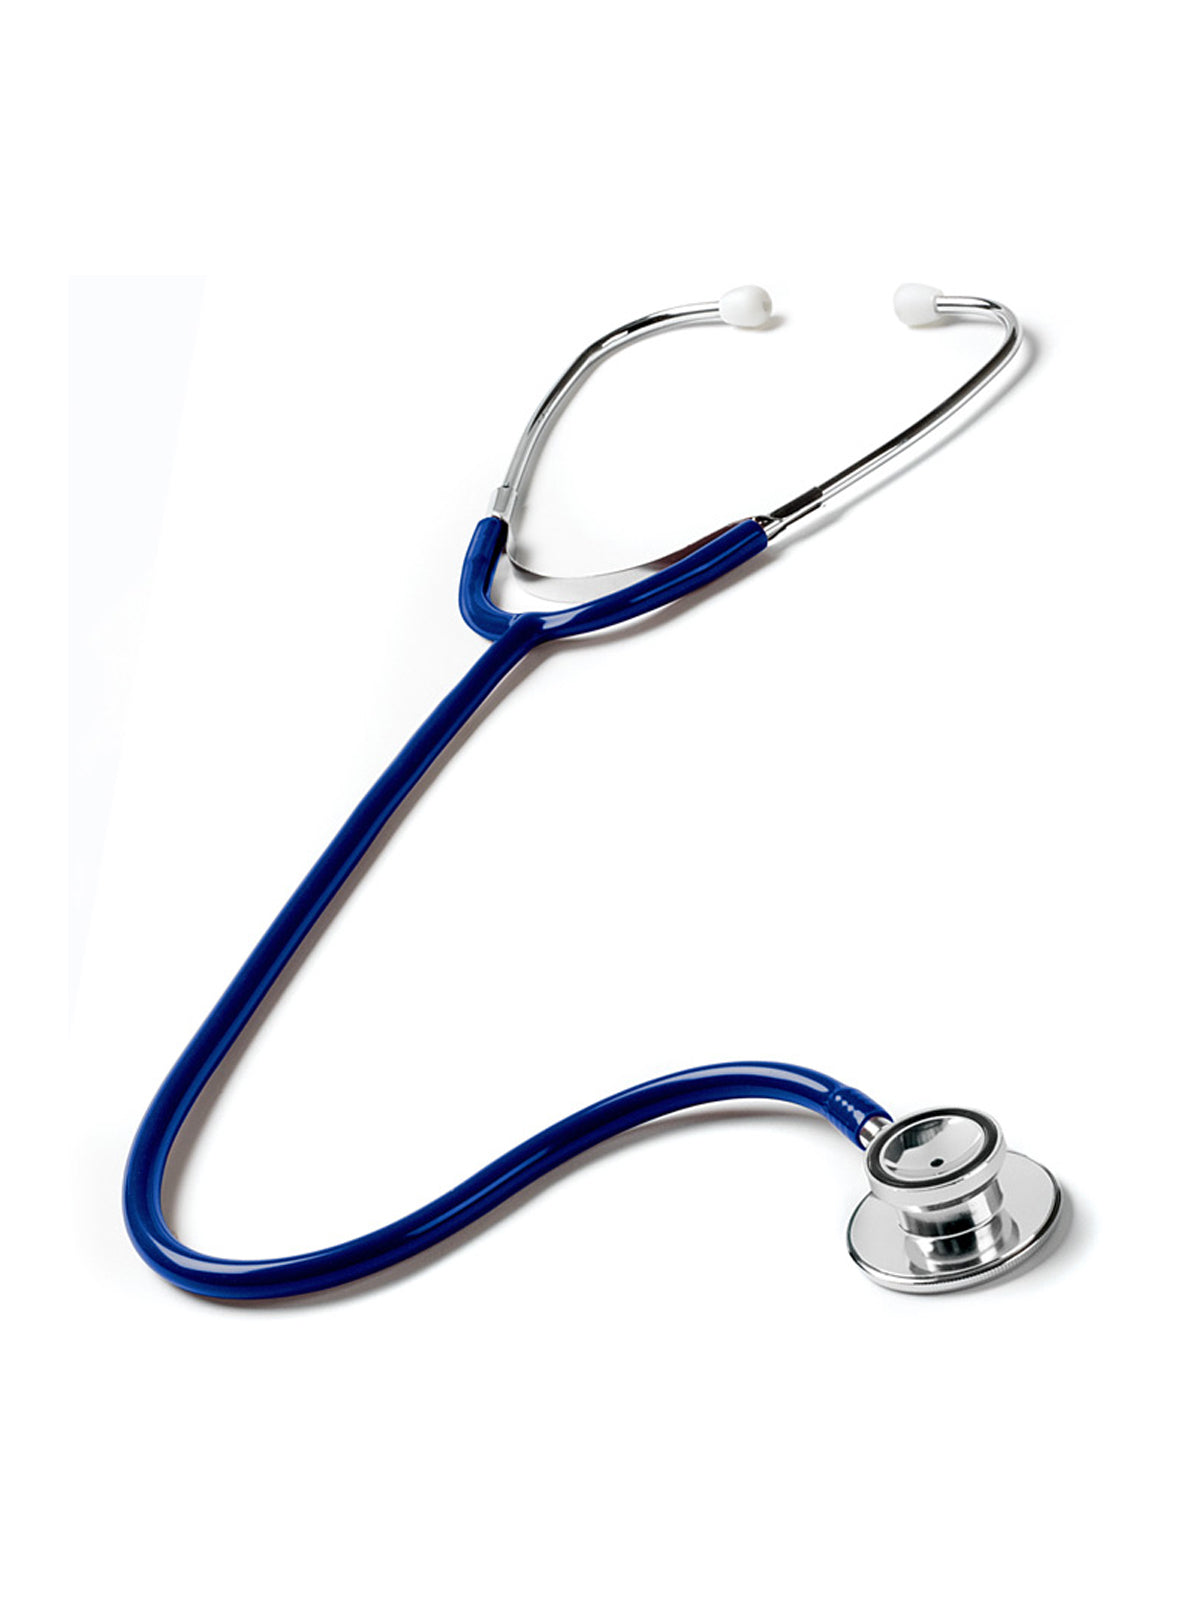 Dual Head Stethoscope (Clamshell) - S108 - Navy